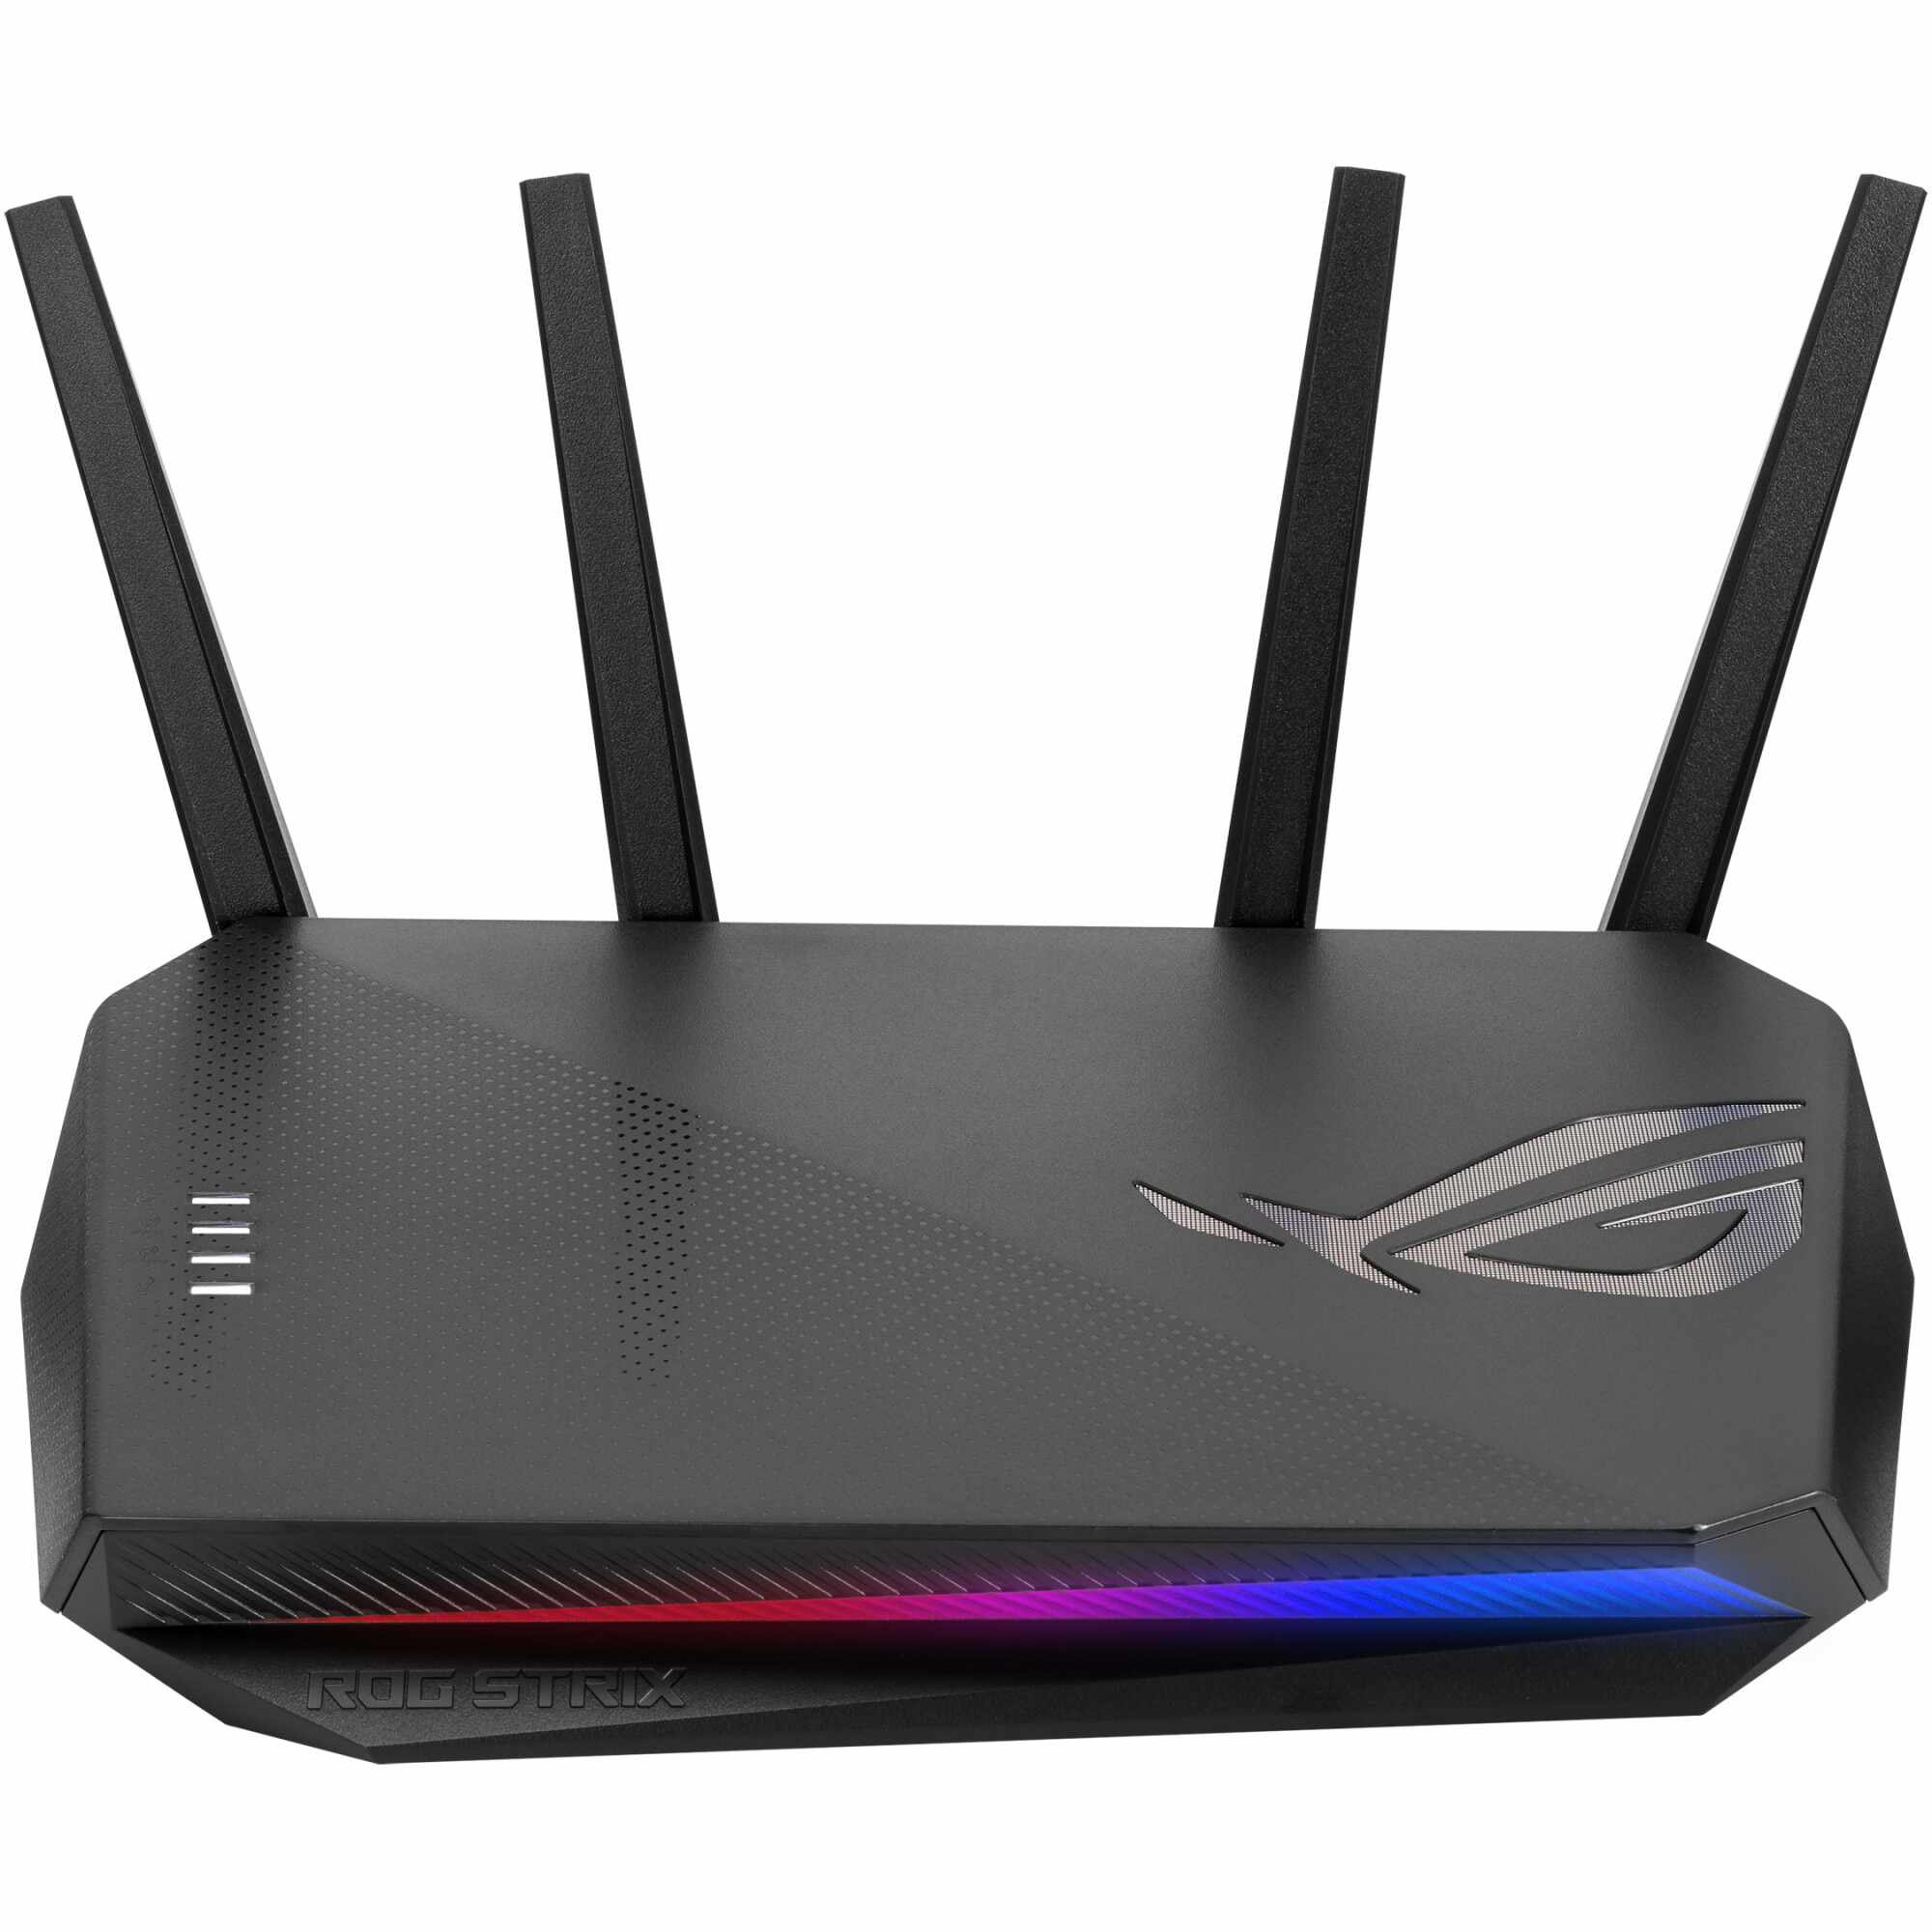 Router Wireless Gaming ASUS Rog Strix GS-AX5400, AX5400, Dual-Band, Wi-Fi 6, MU-MIMO, Mobile Game Mode, compatibil PS5, Instant Guard, Gear Accelerator, 4 antene Wi-Fi